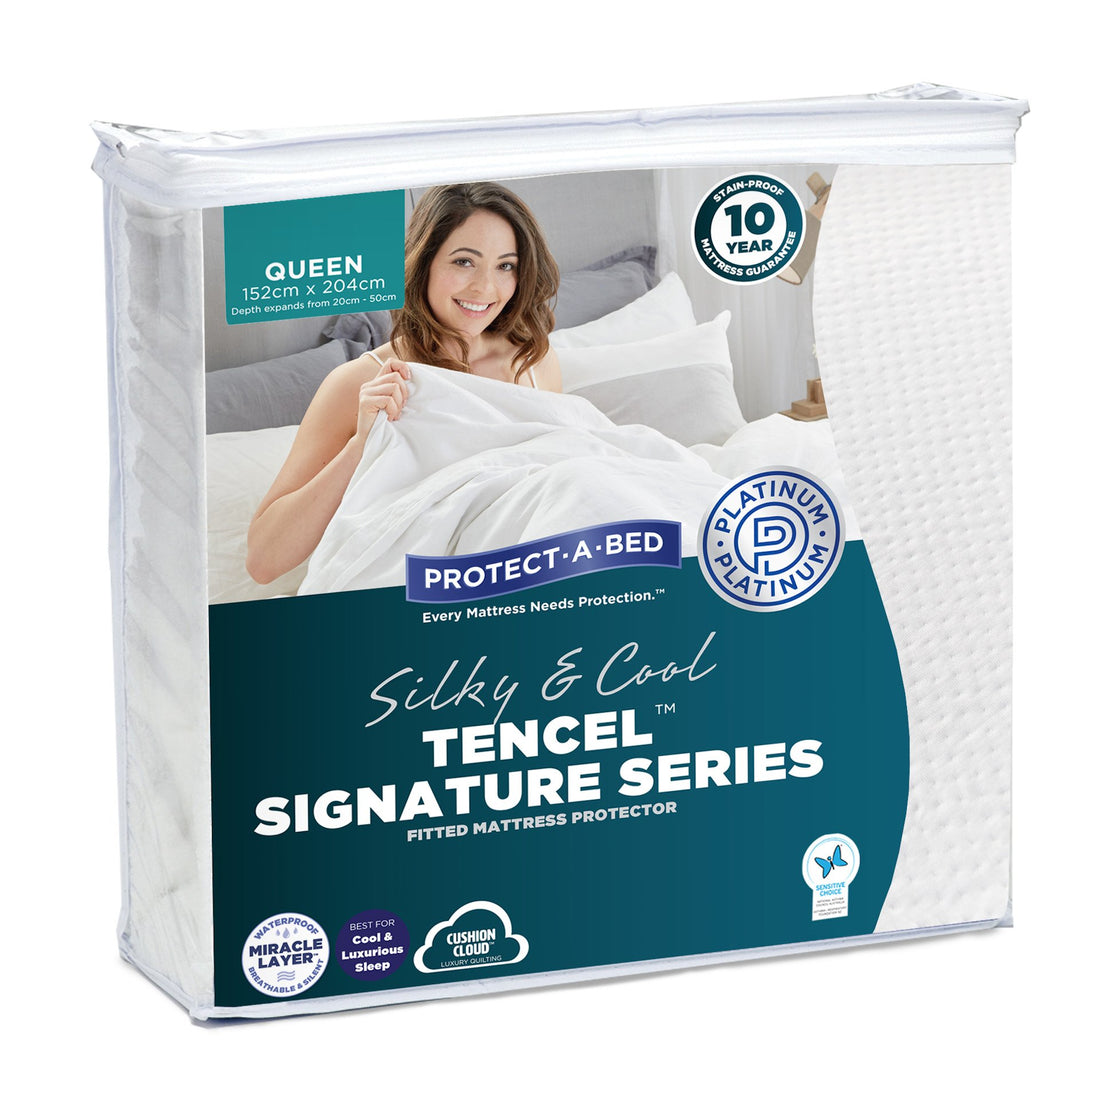 Signature Tencel Fitted Mattress Protector - Queen